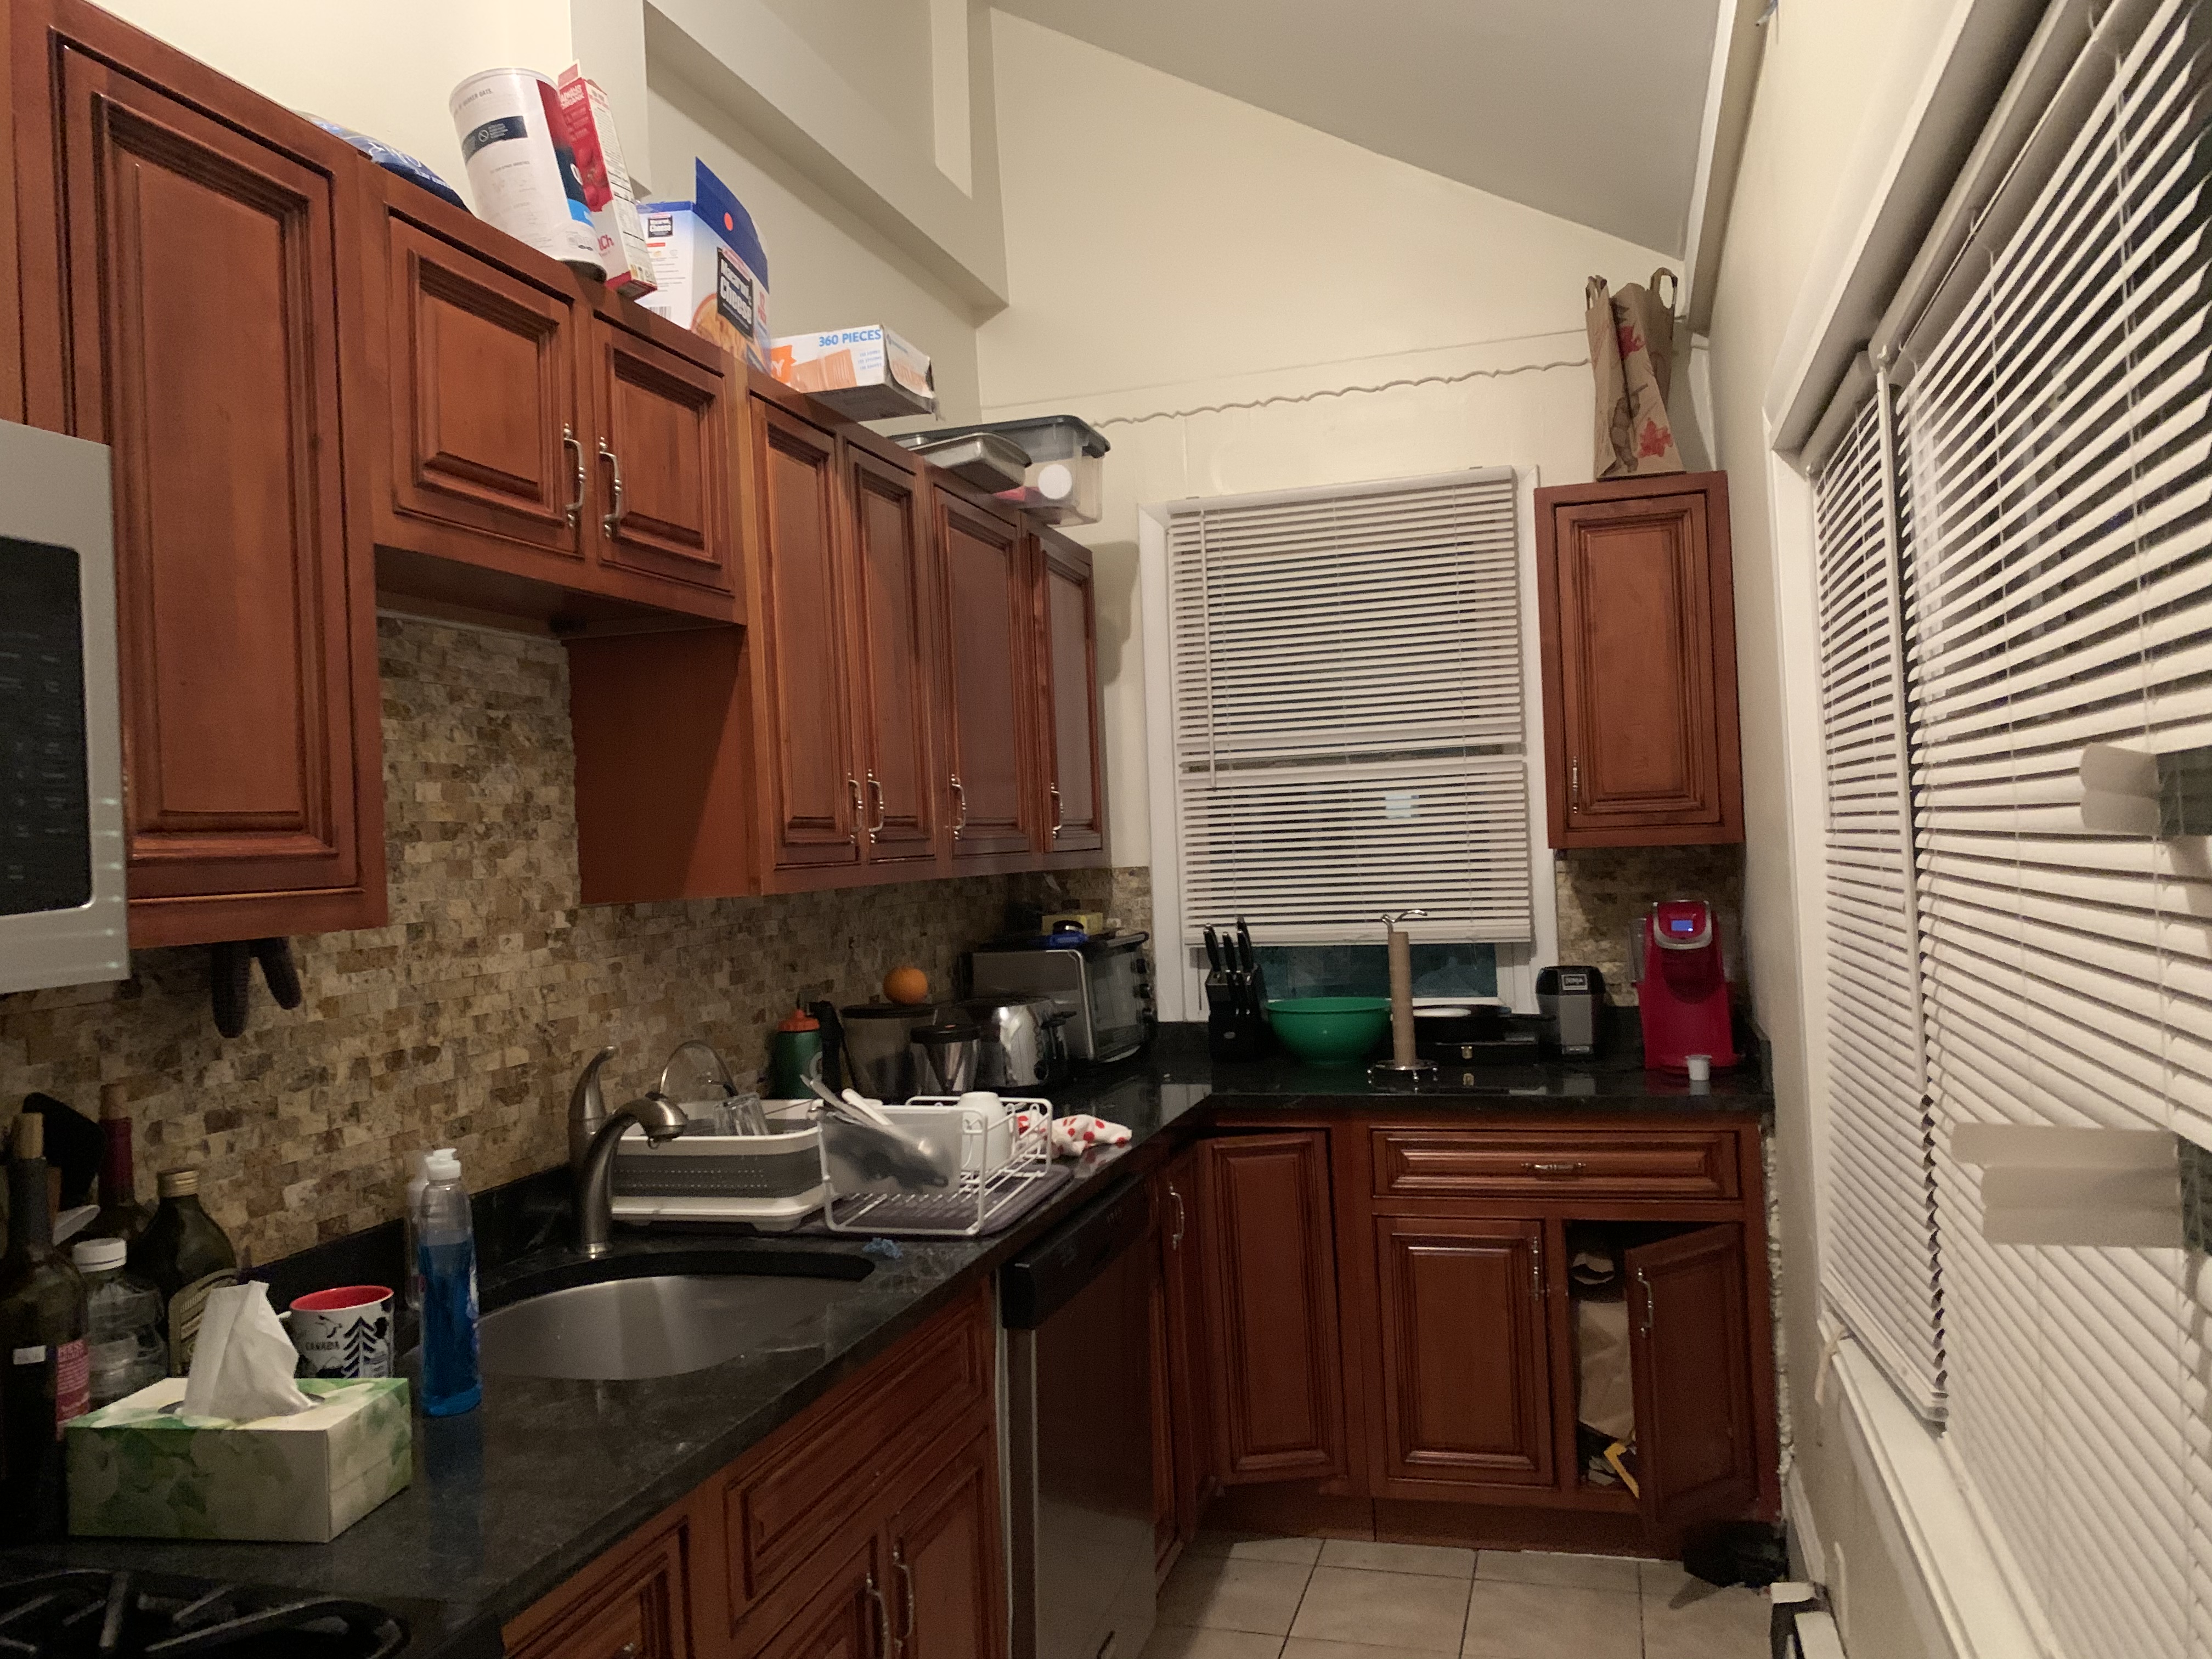 Pictures of  property for rent on Pratt St., Boston, MA 02134